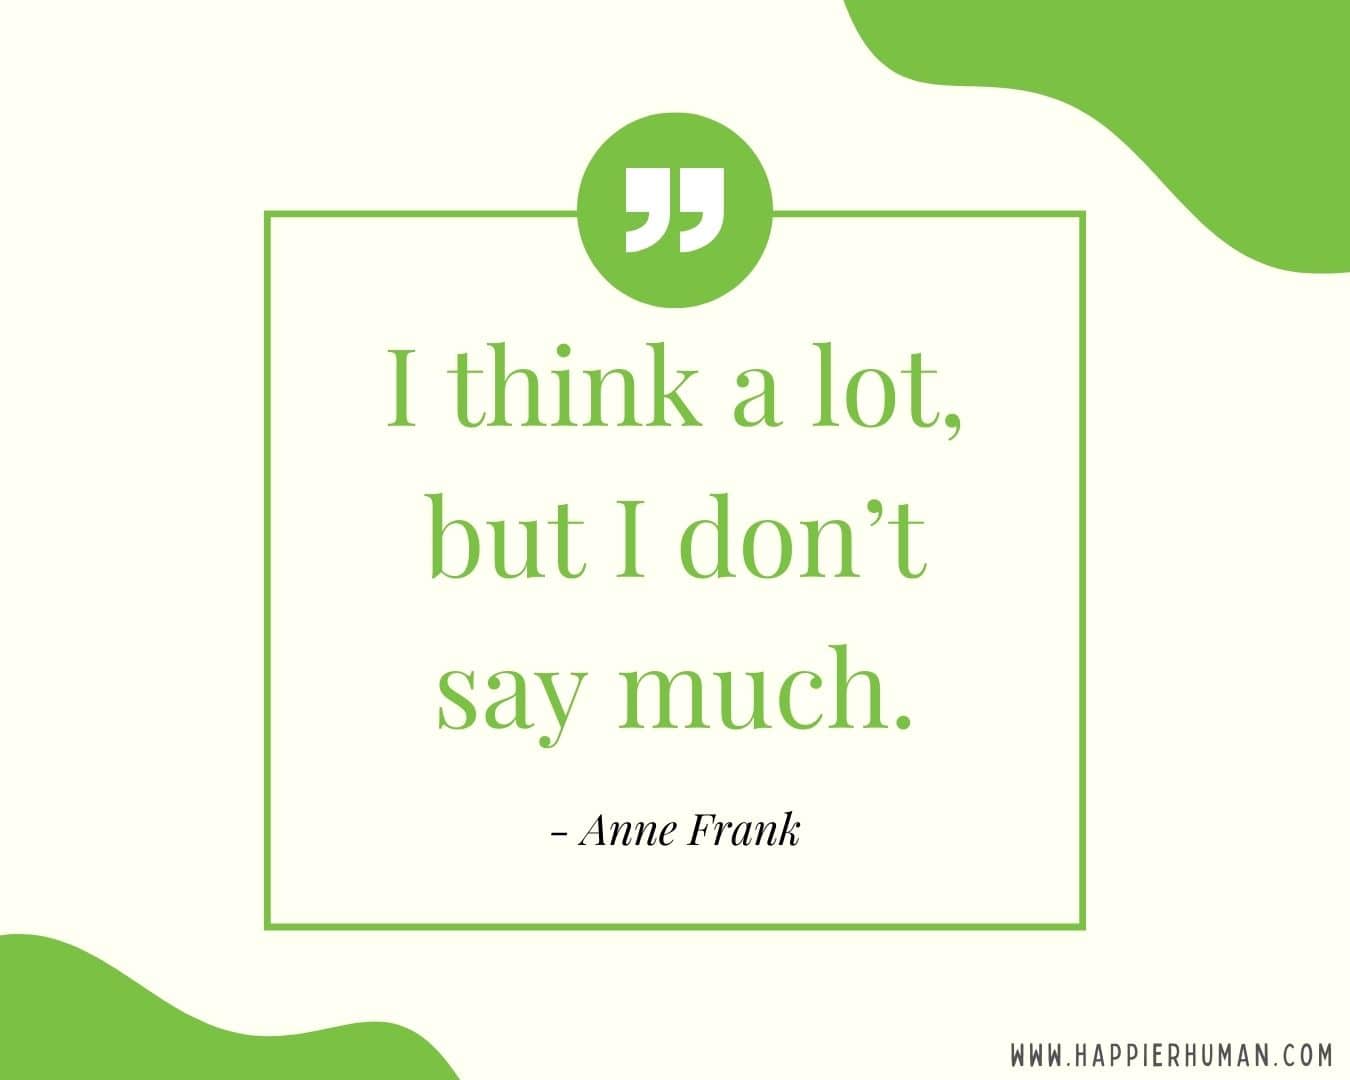 Introvert Quotes - “I think a lot, but I don’t say much.” – Anne Frank